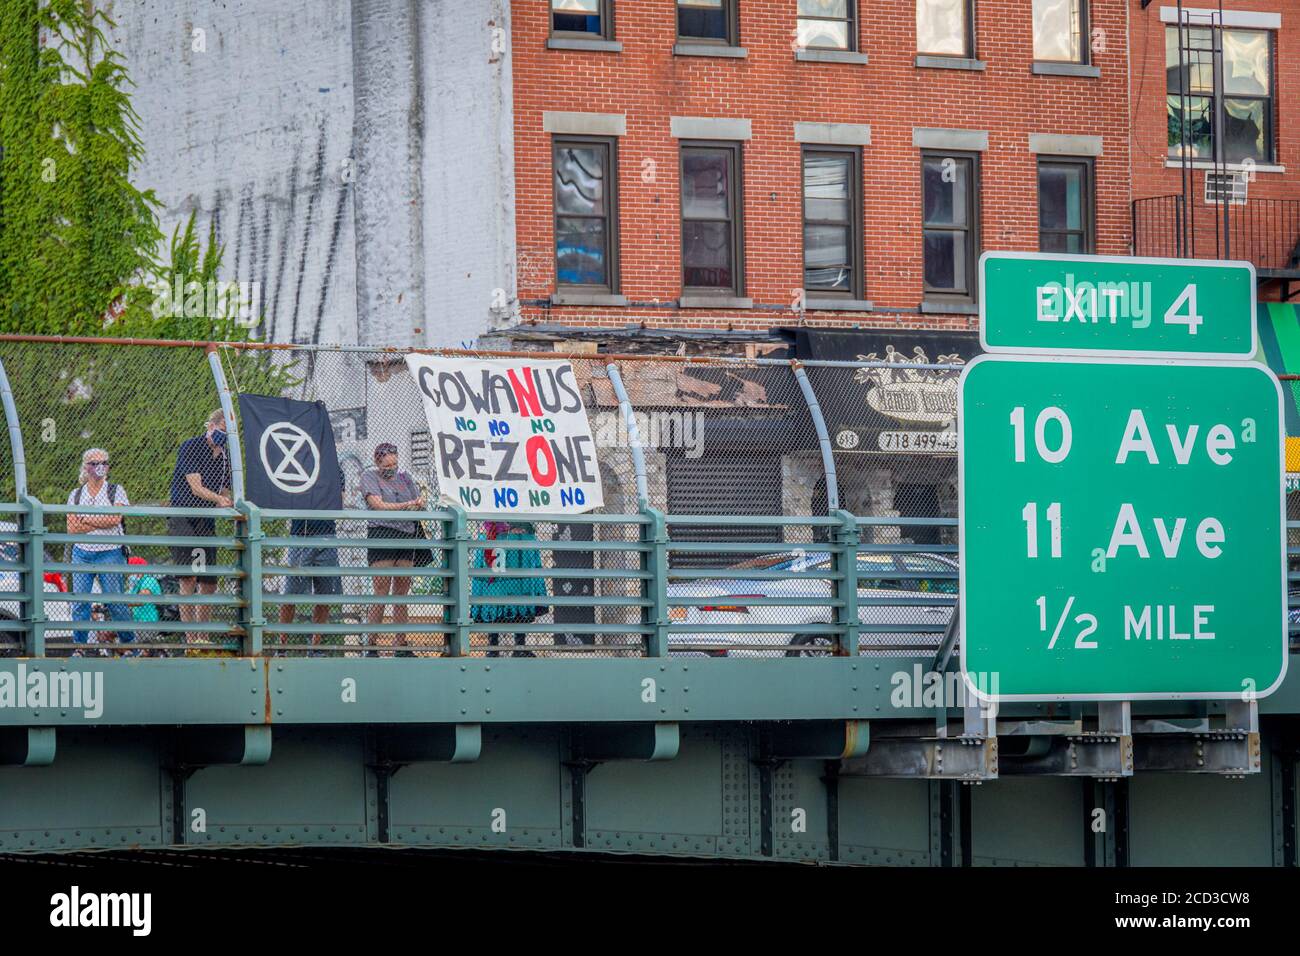 USA. 18th Aug, 2020. Protesters holding a No Gowanus Rezoning banner at the overpass. Gowanus residents organized a banner drop during rush hour at an overpass over the Prospect expressway in Brooklyn on August 18, 2020 to call on elected officials to oppose the proposed Gowanus rezoning. (Photo by Erik McGregor/Sipa USA) Credit: Sipa USA/Alamy Live News Stock Photo